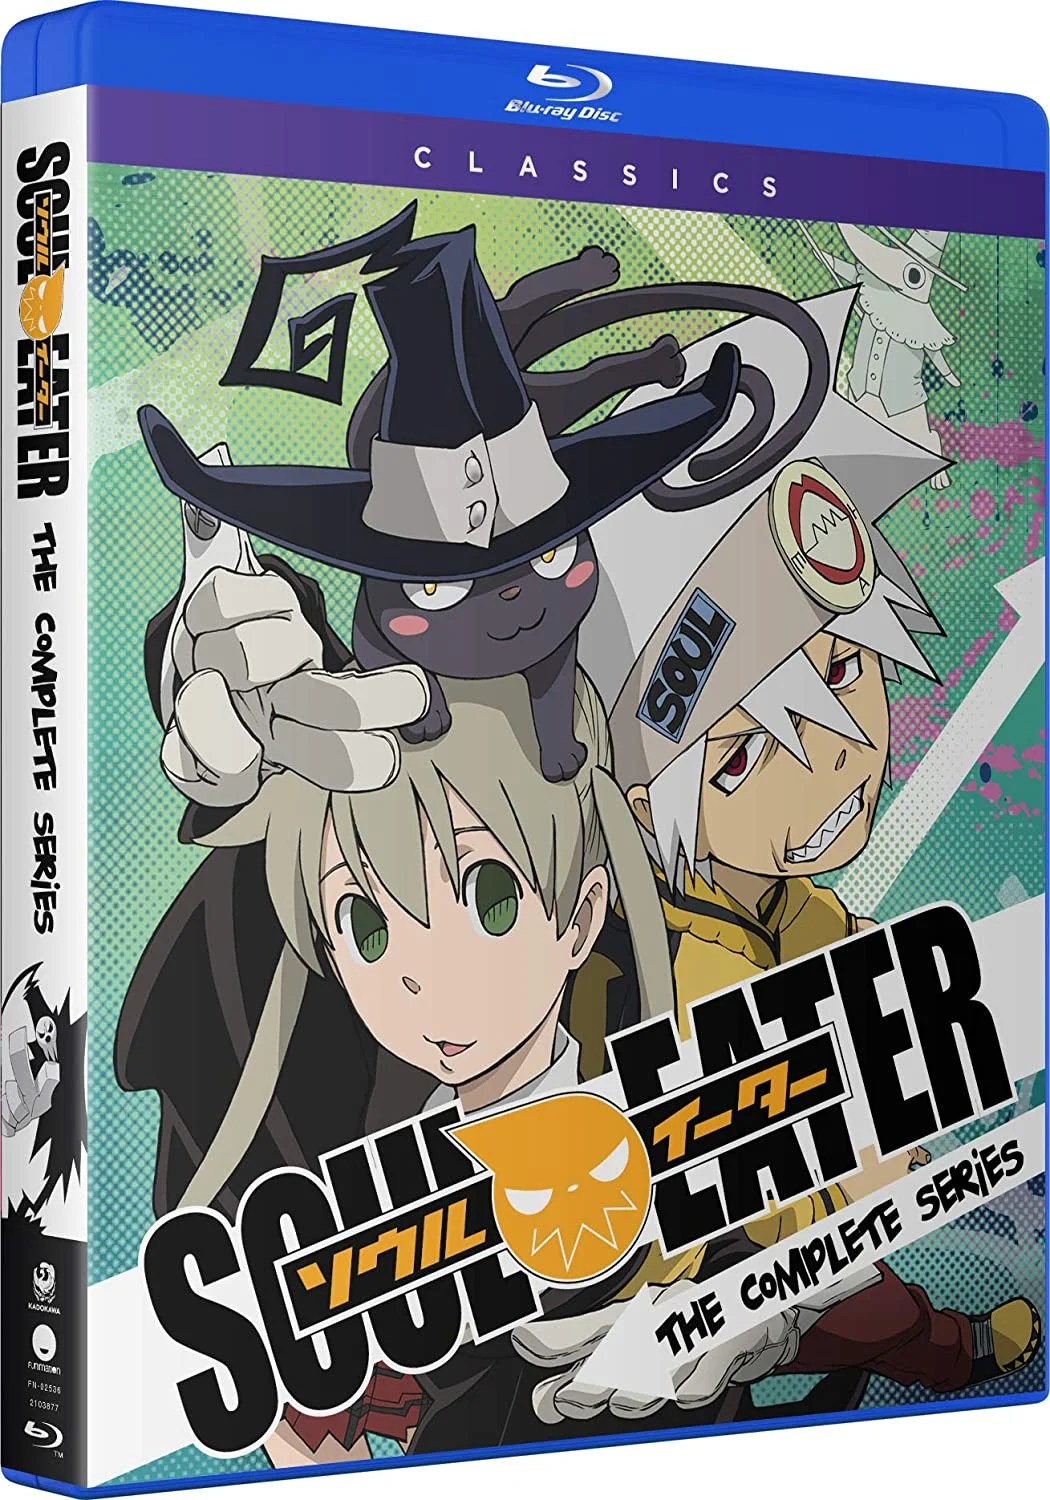 Soul Eater: Complete Series (Blu-ray) on MovieShack